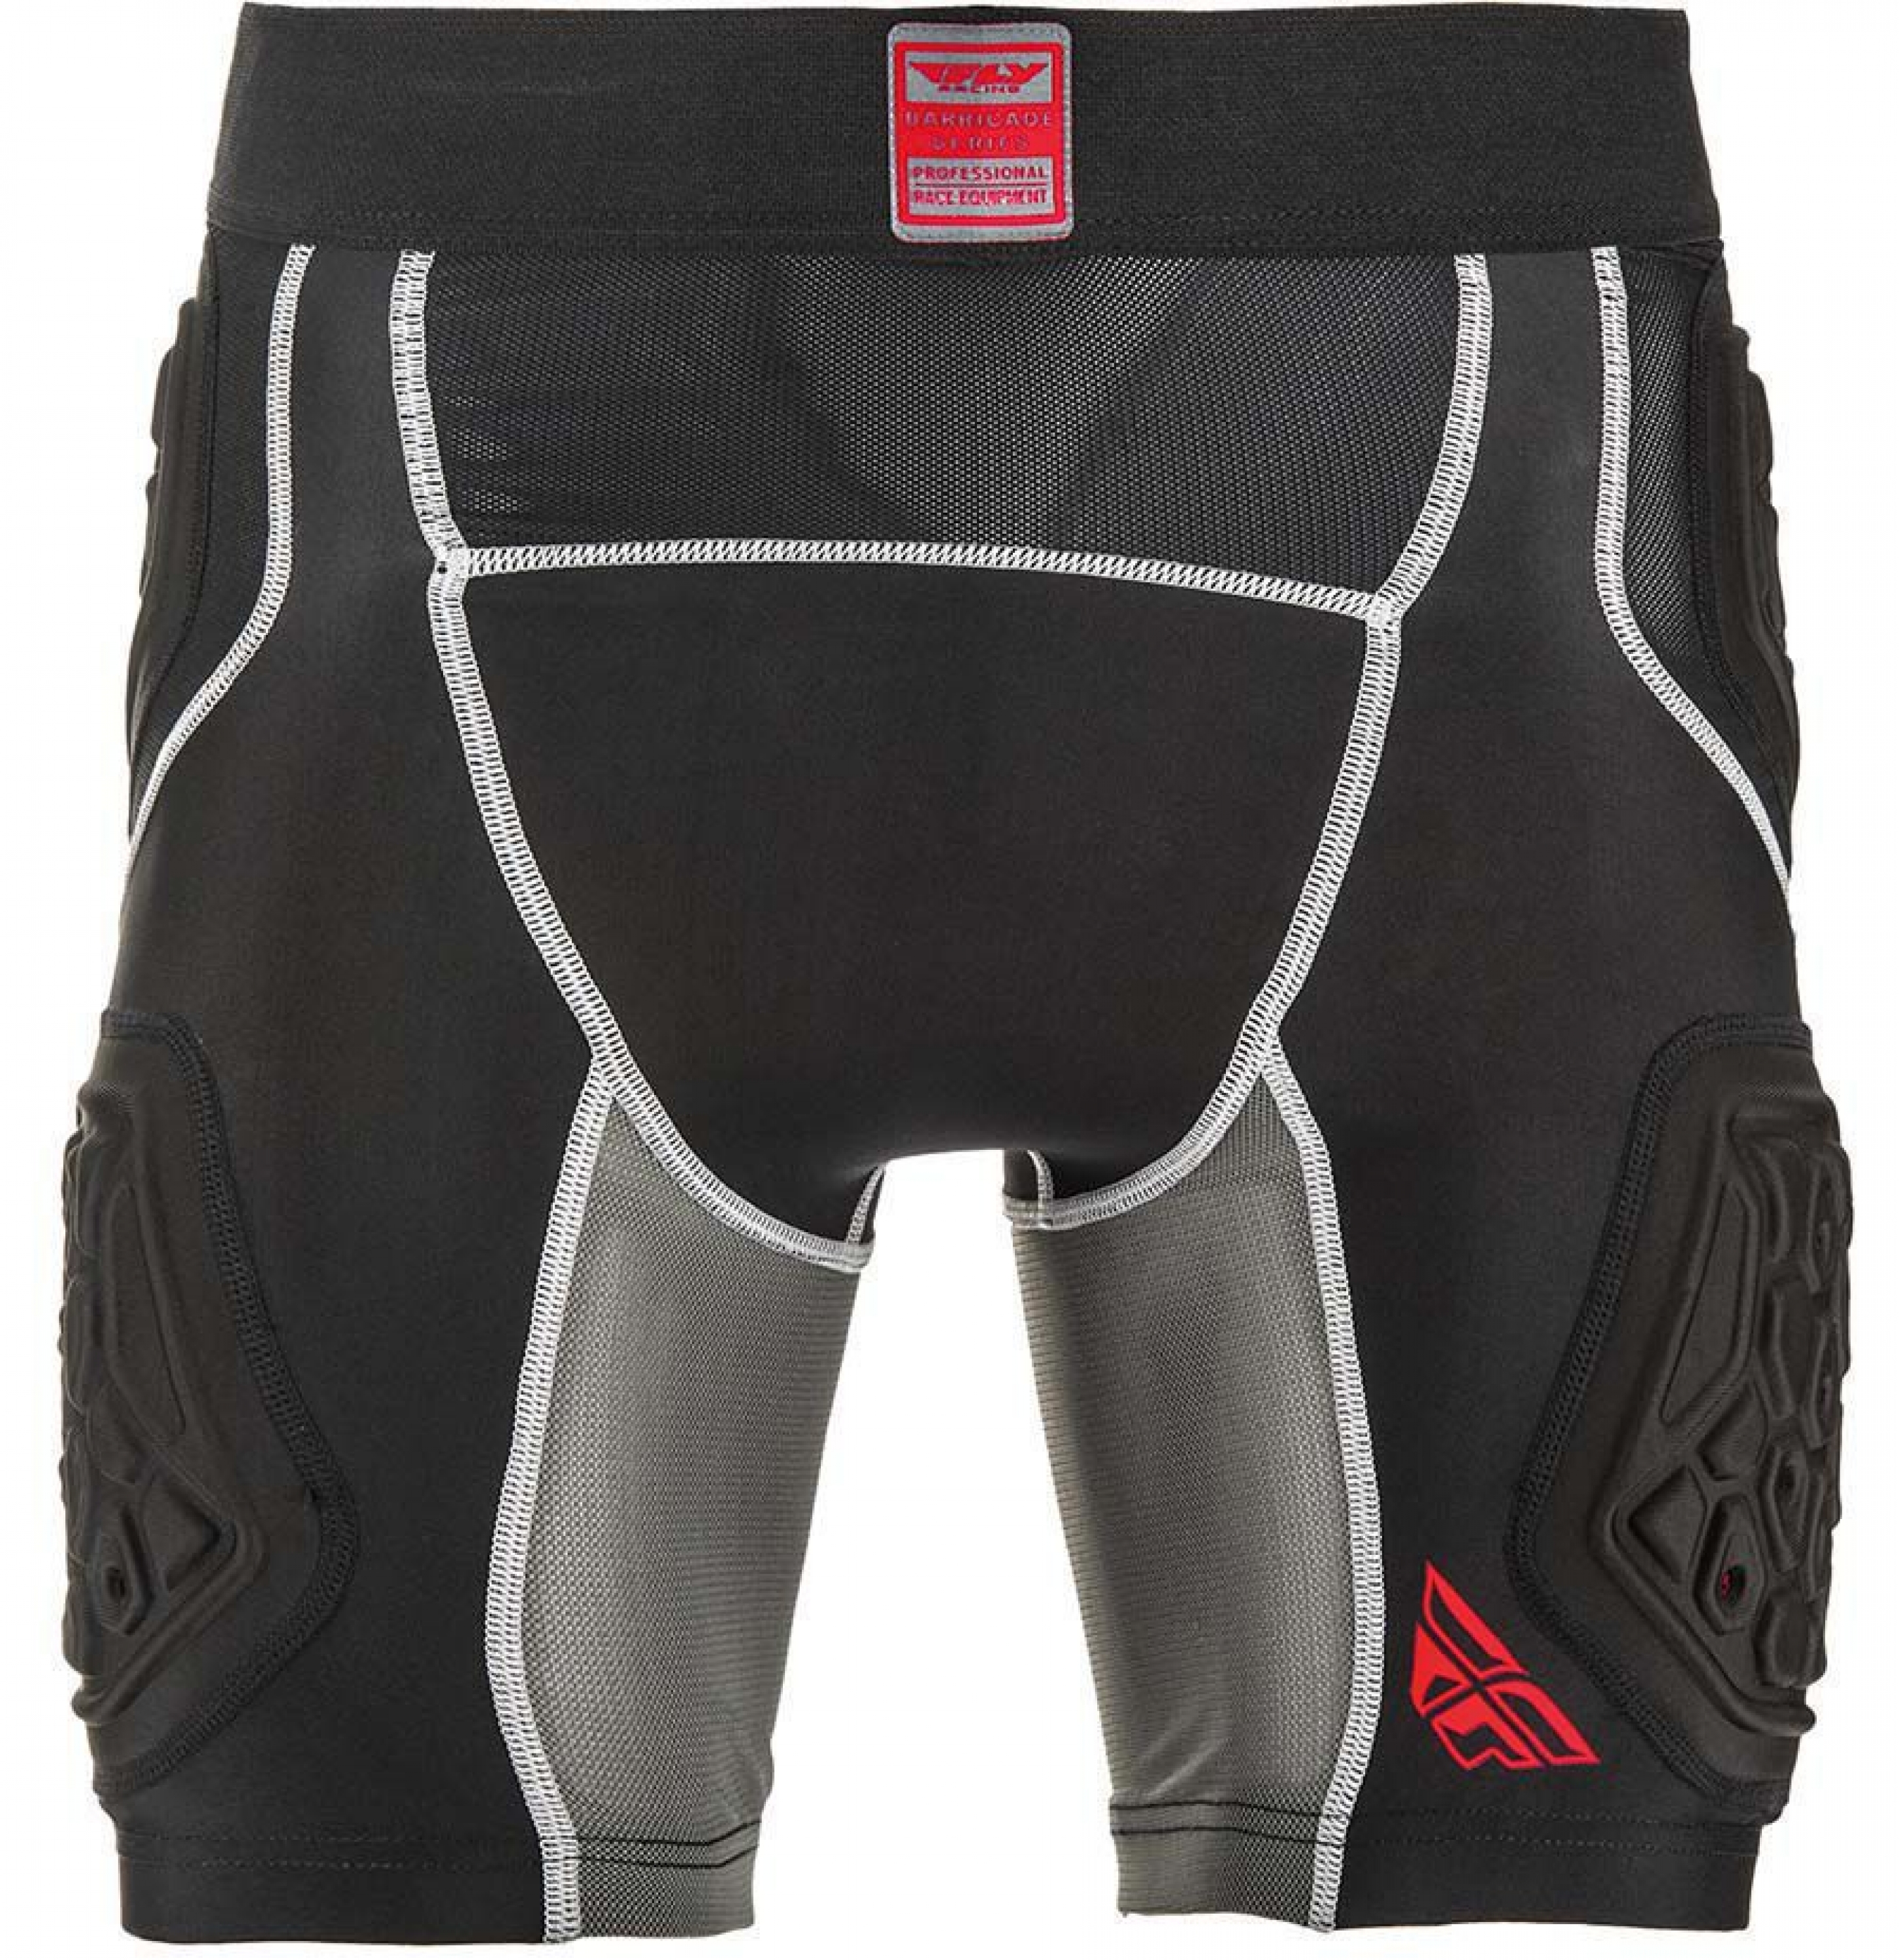 Fly Barricade Compression Shorts